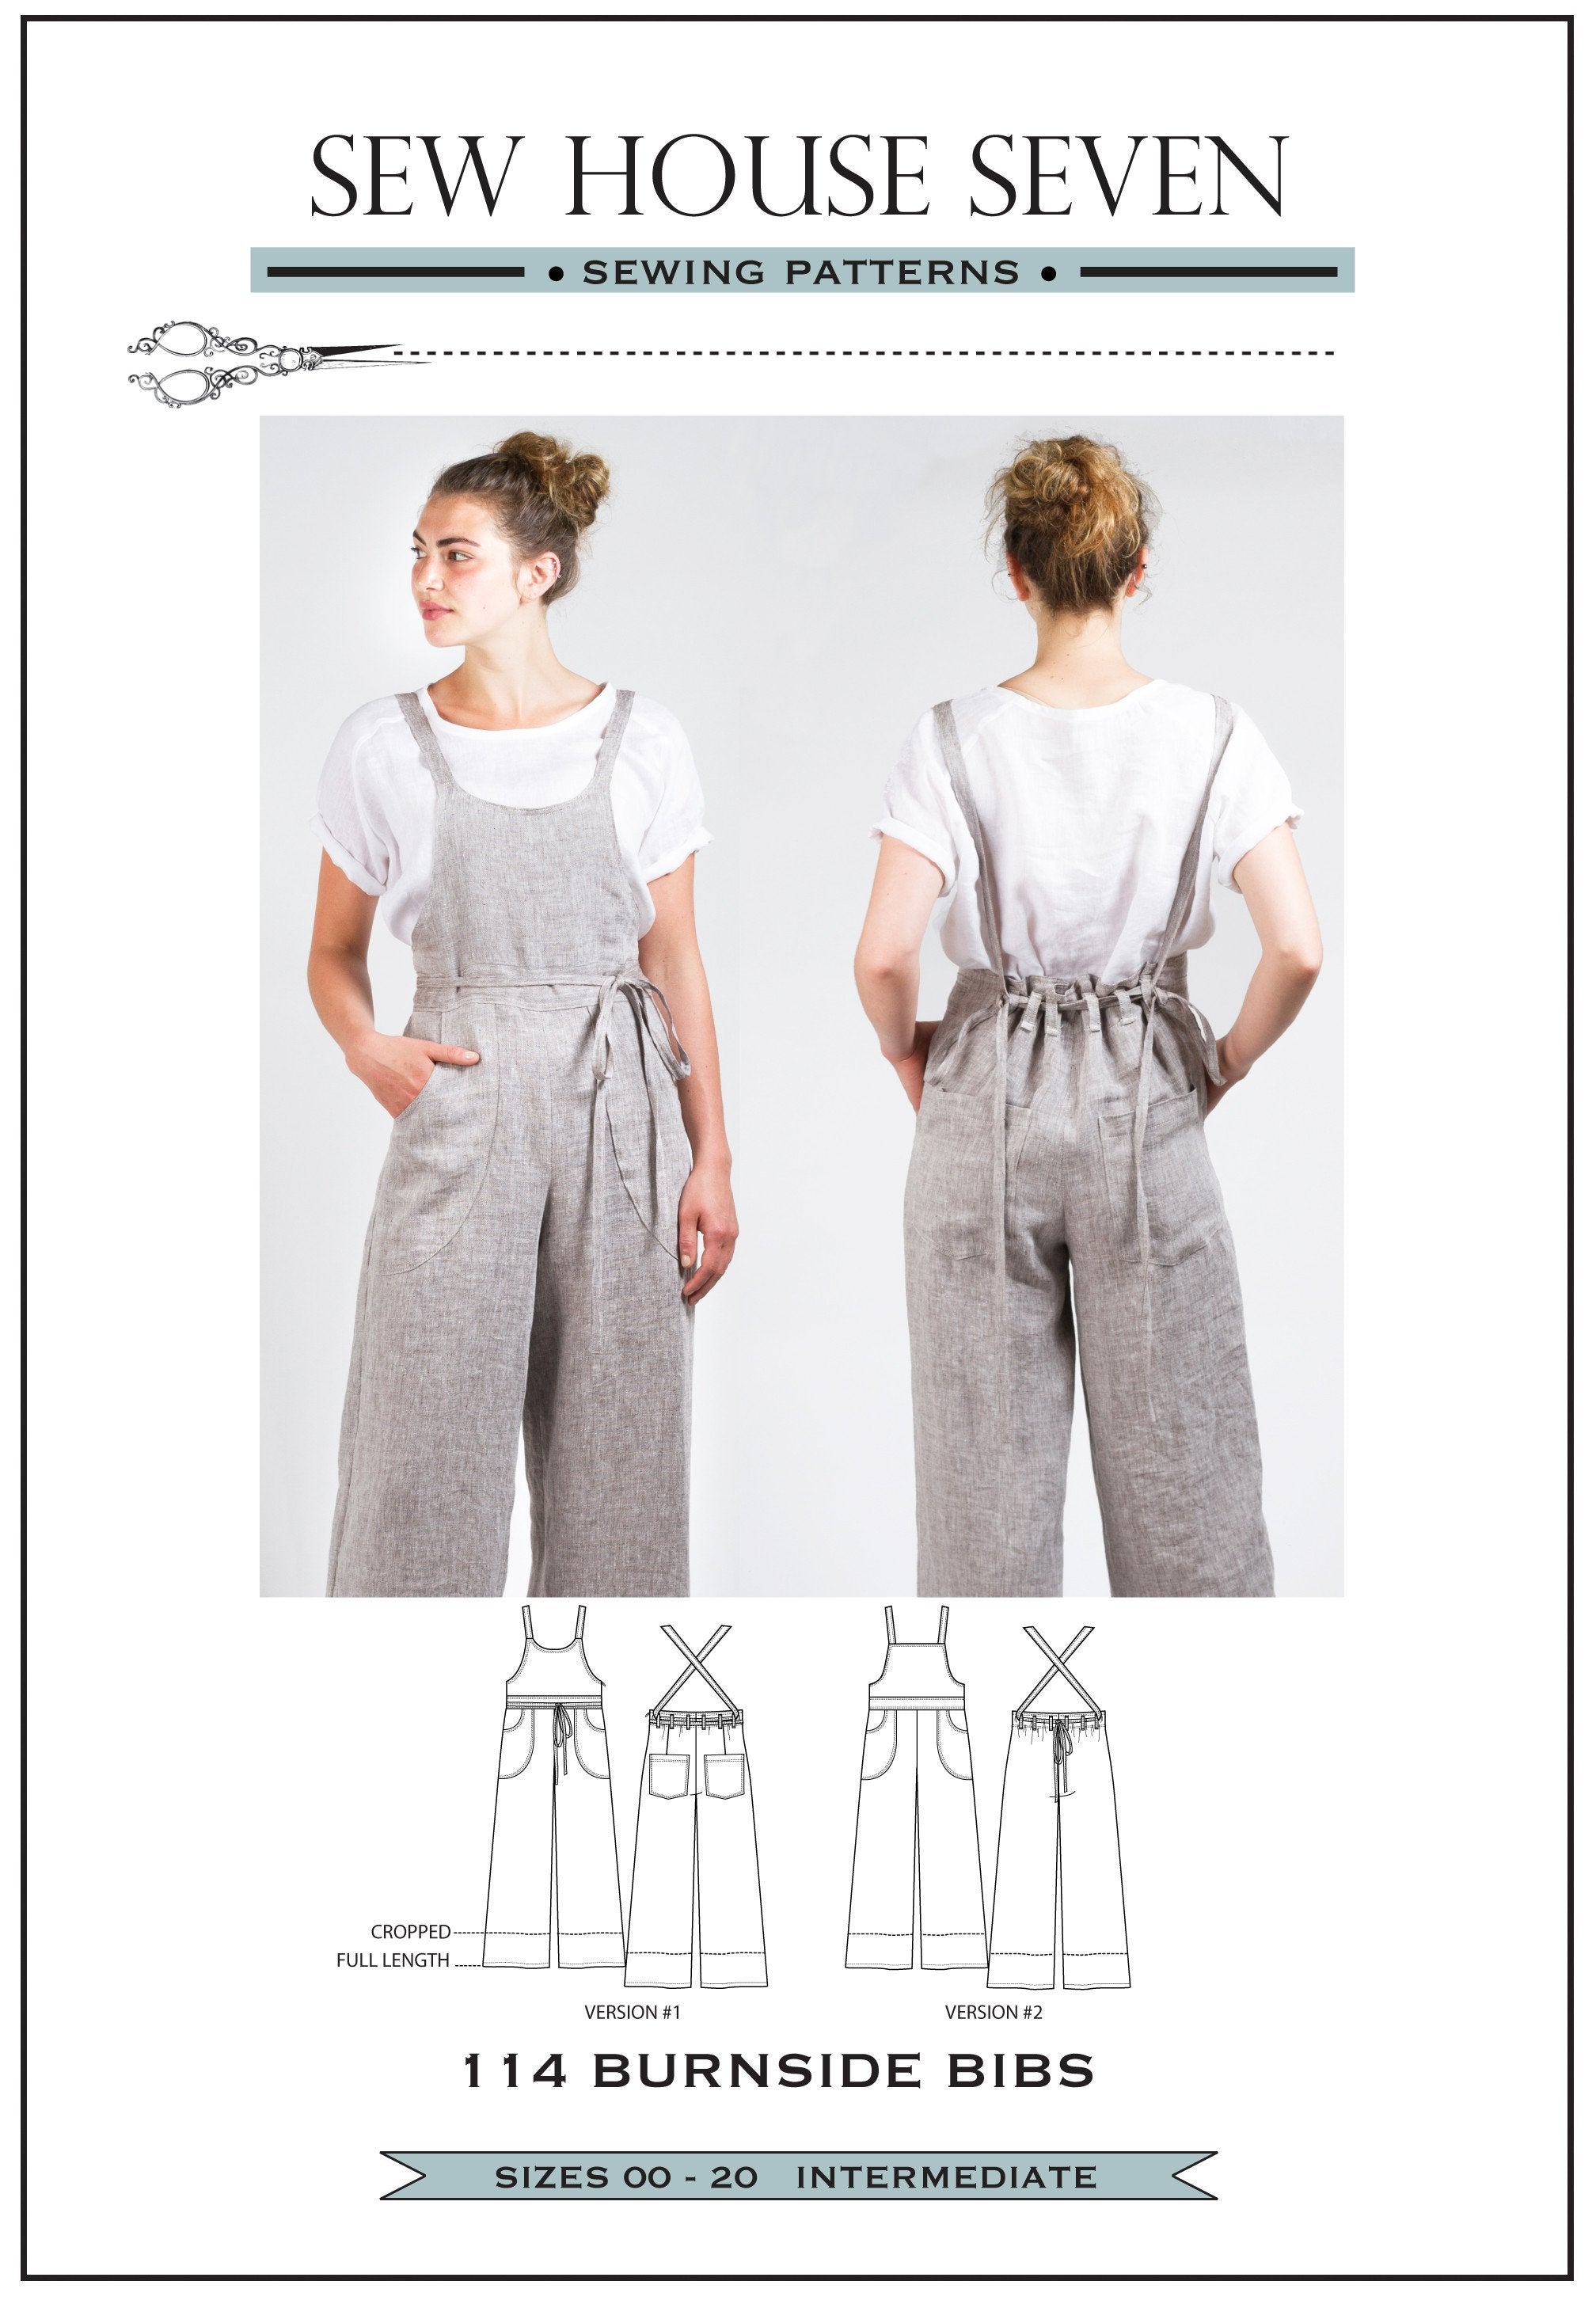 Burnside Bibs Standard 00 - 20 Sewing Pattern by Peggy Mead of Sew House Seven